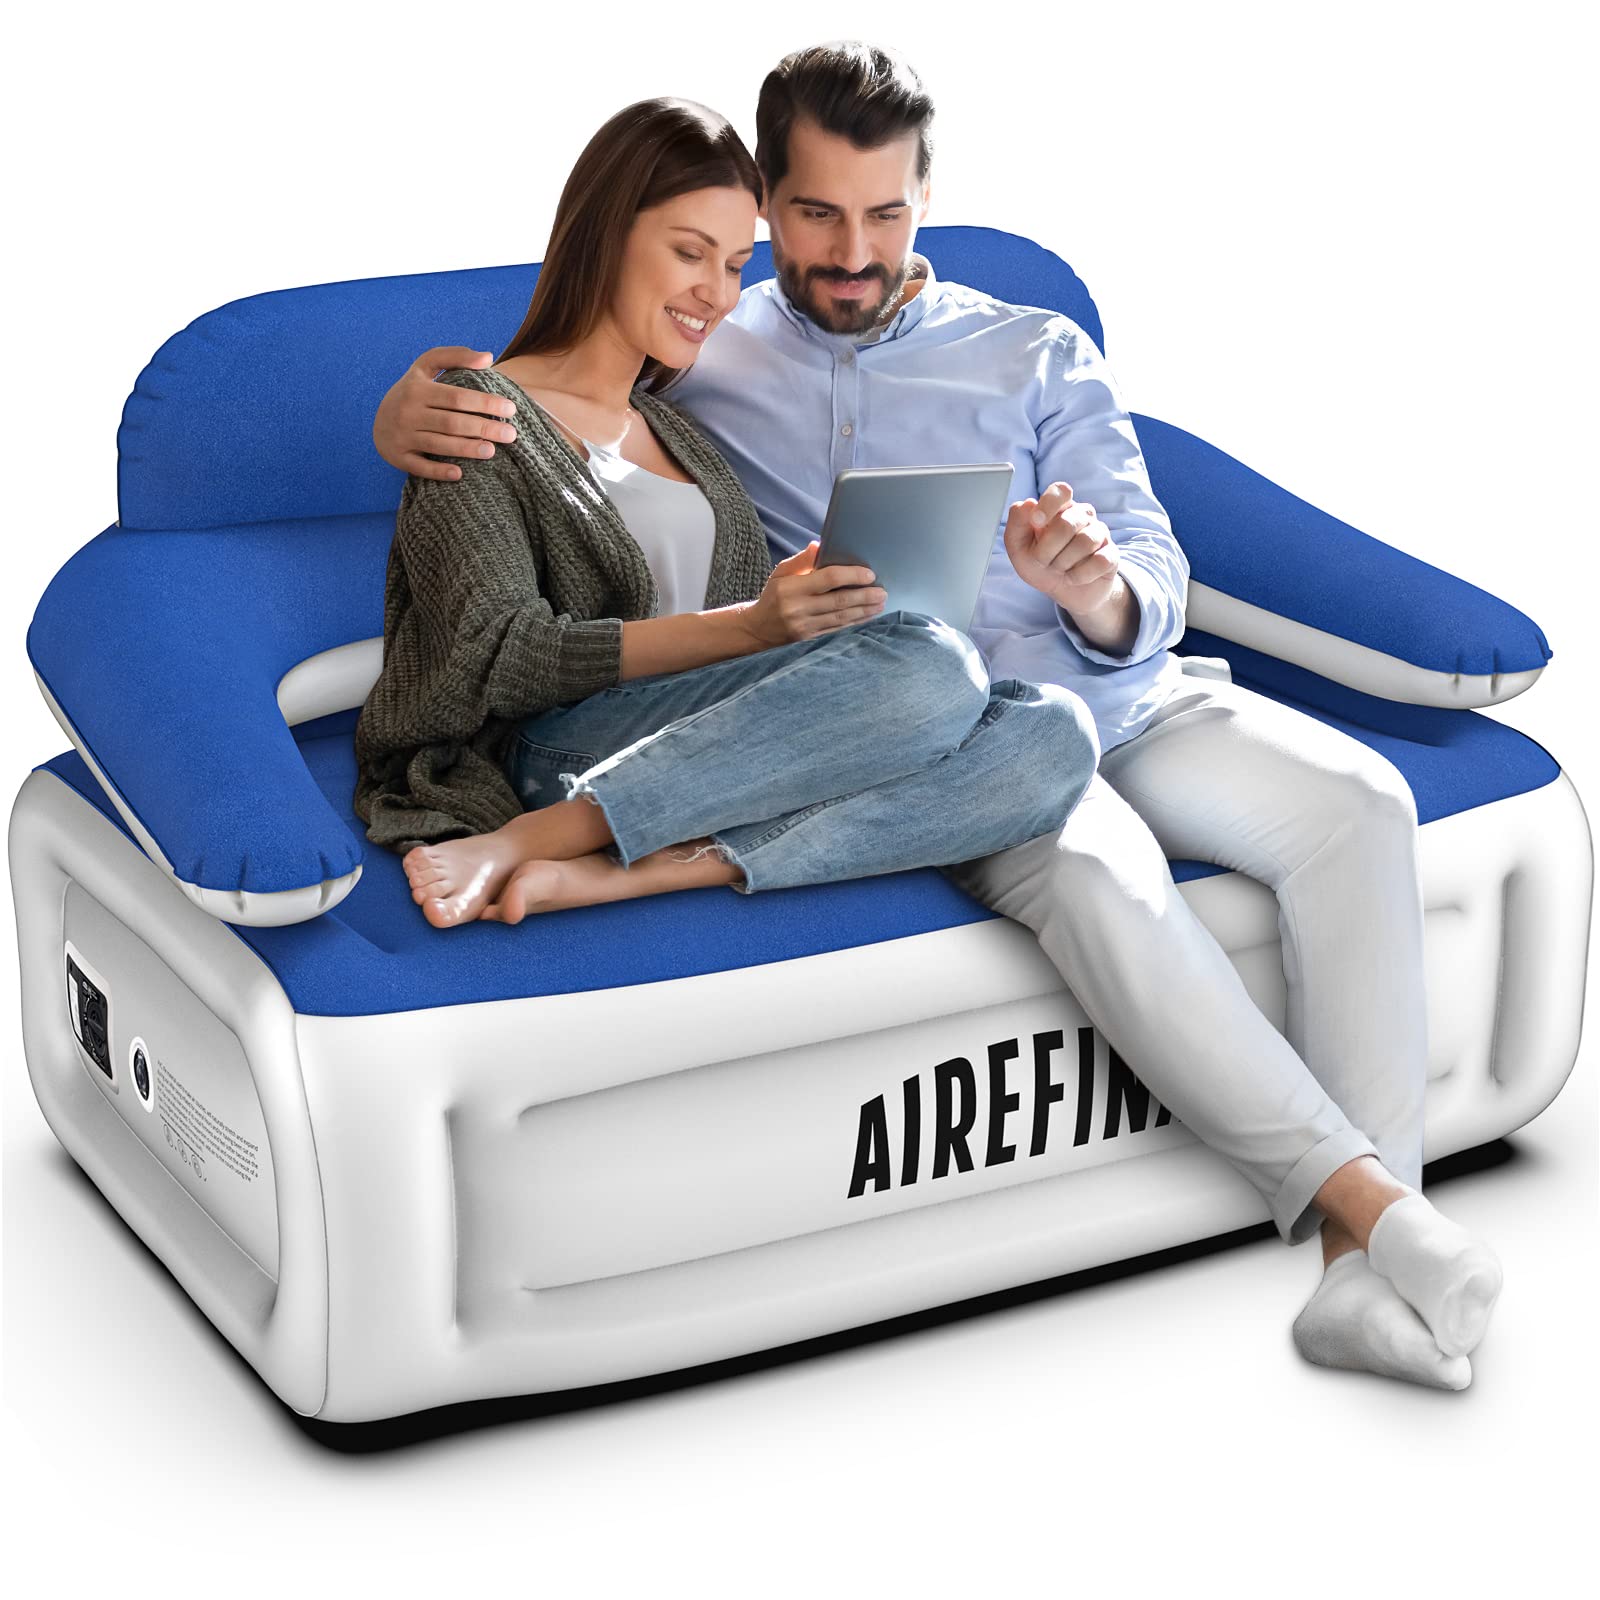 Airefina Inflatable Sofa, Air Sofa Bed 3 Seater with Built-in Pump, Outdoor Inflatable Sofa Camping, Portable Inflatable Air Couch with Backrest, Blow Up Lounger, 3-Min Fast Inflation Deflation